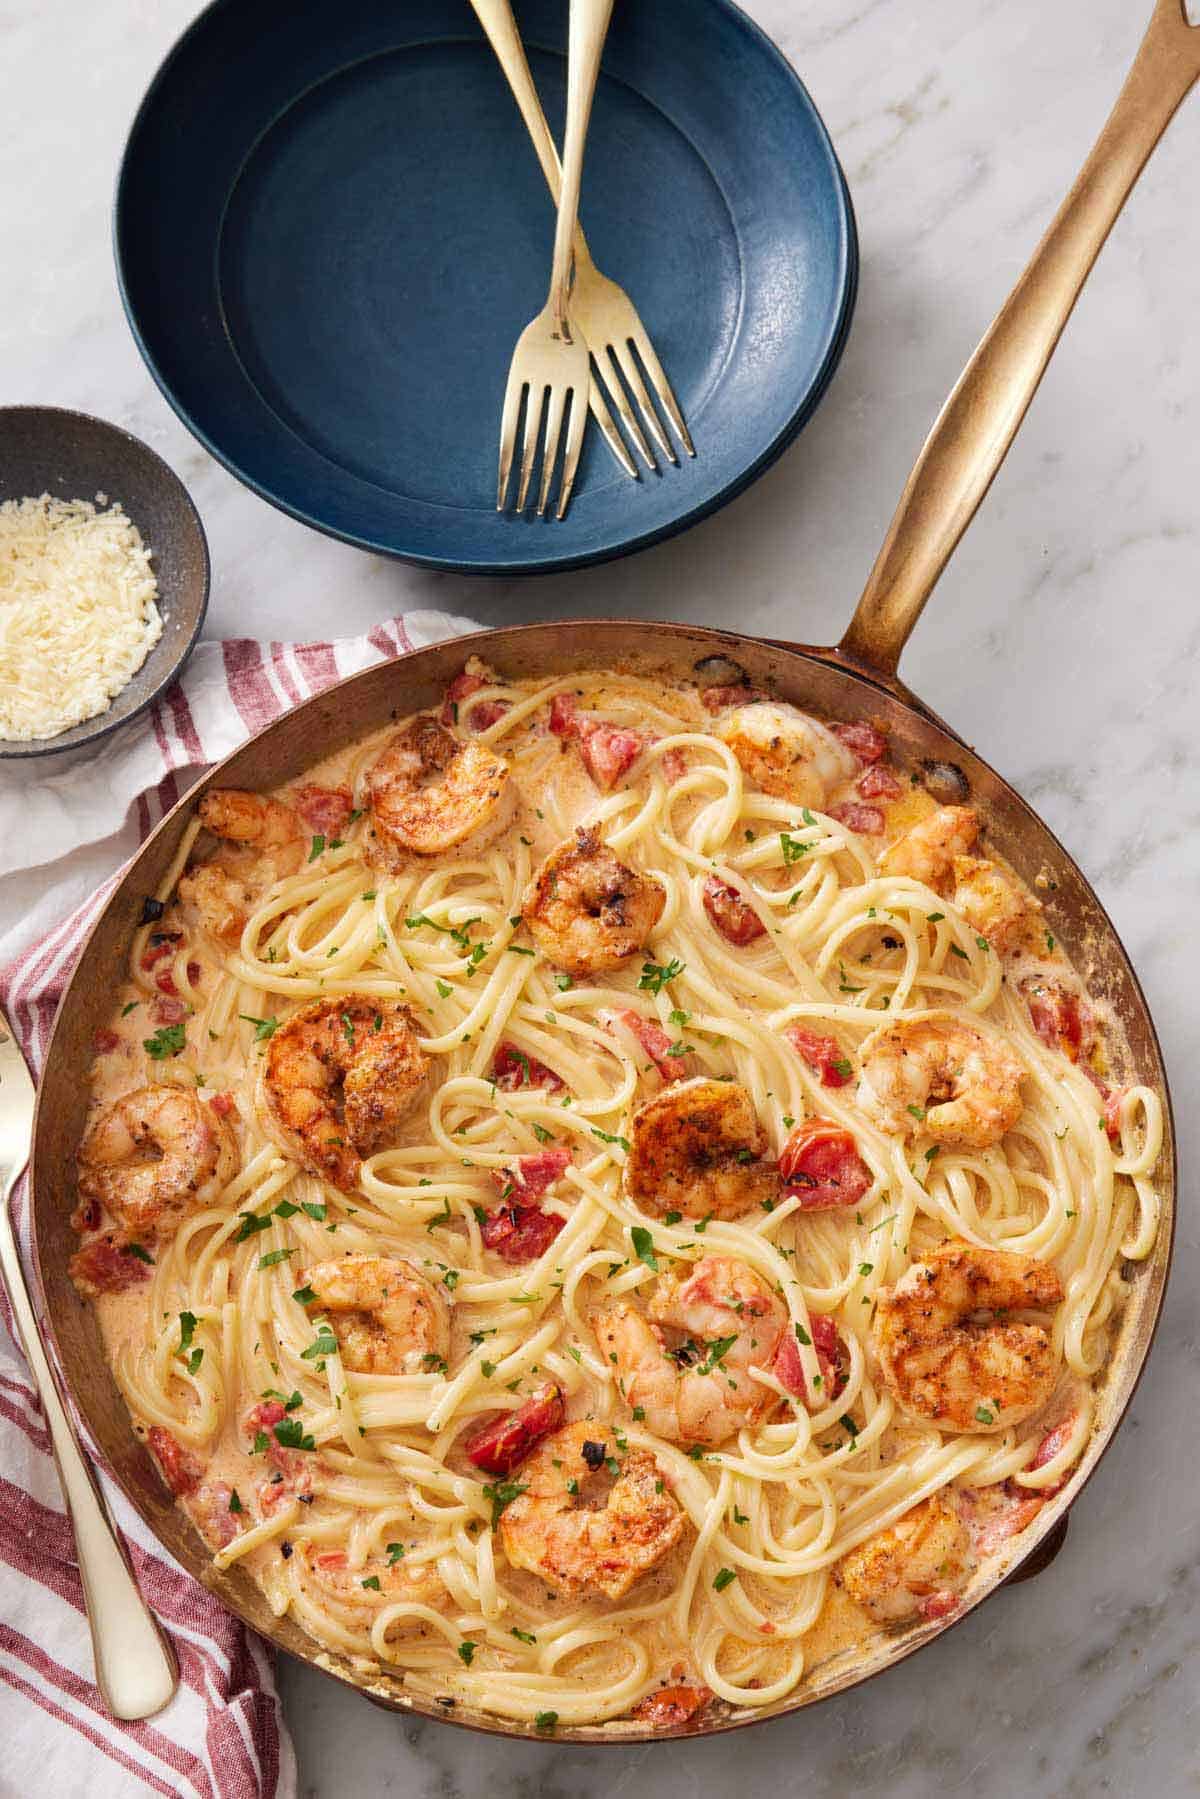 Overhead view of a skillet of cajun shrimp pasta. A plate with two forks beside it.